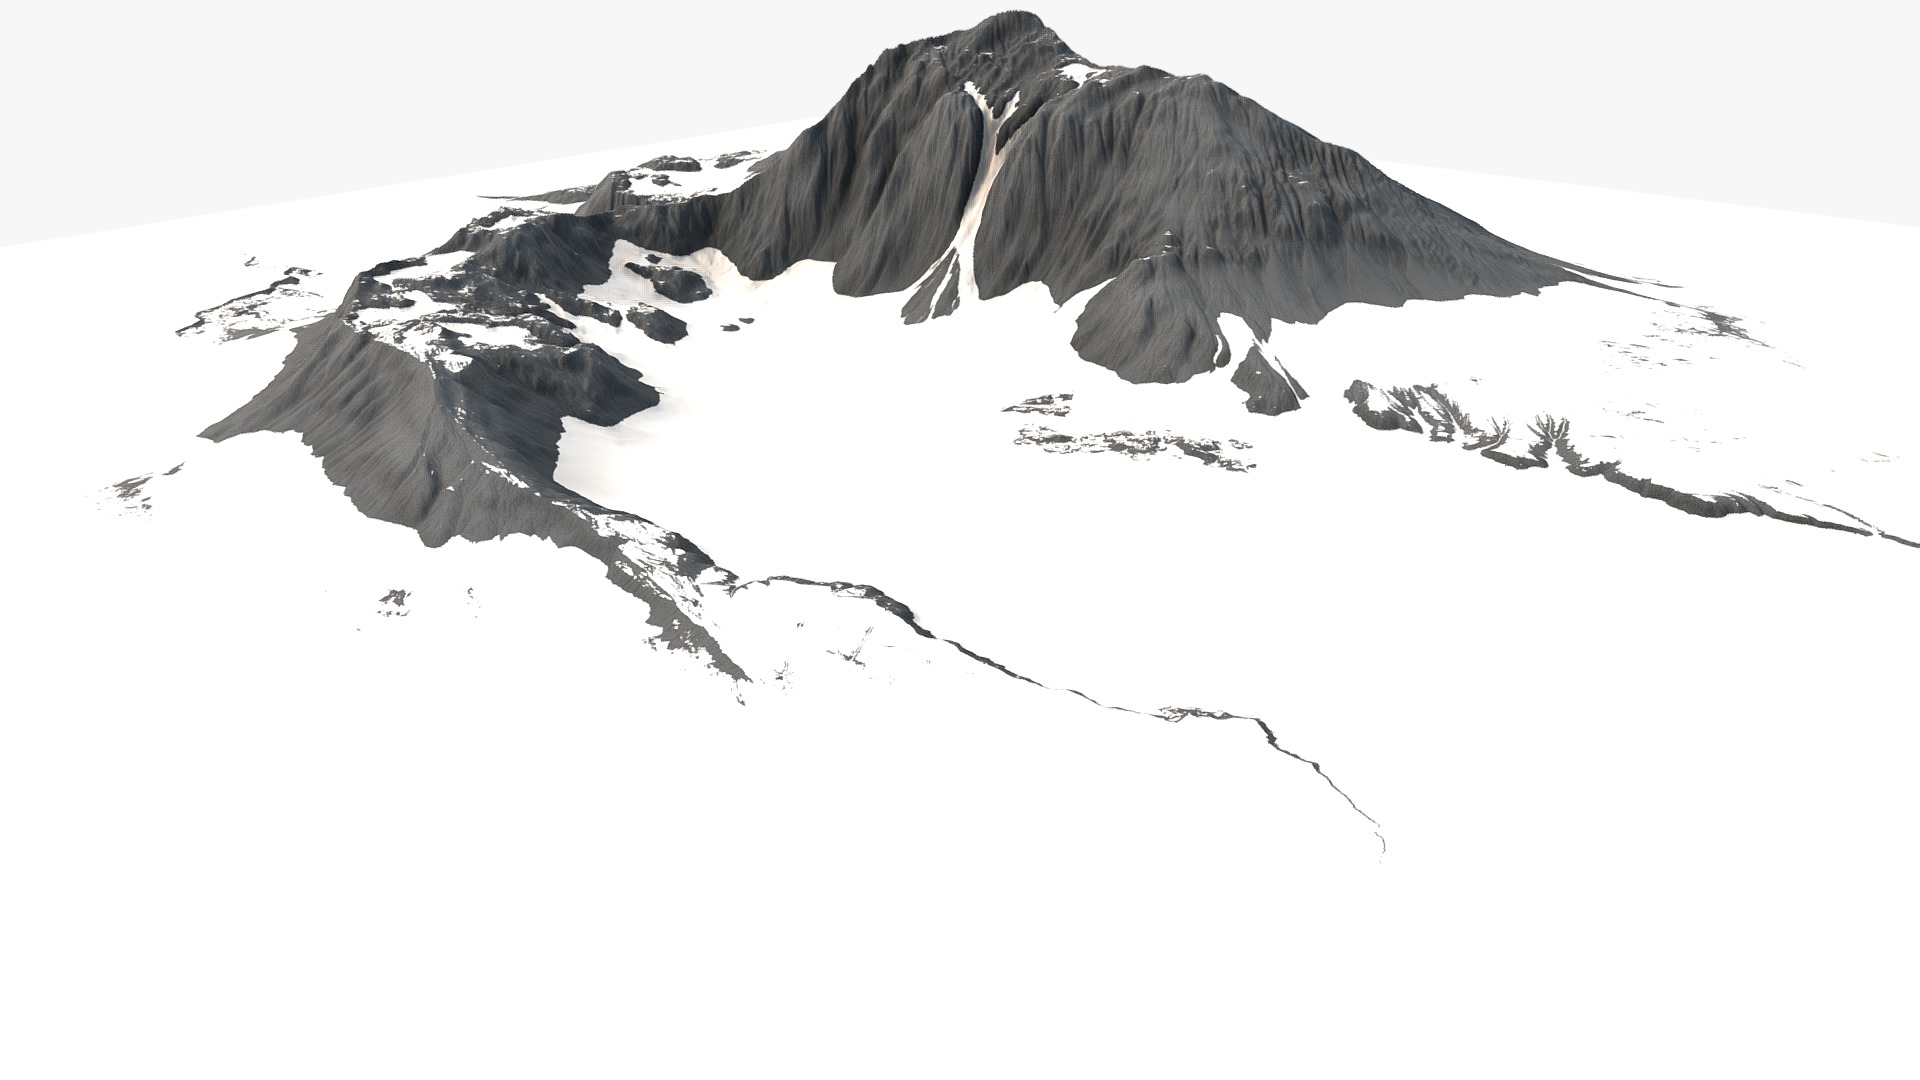 3D model Snow Mountain - This is a 3D model of the Snow Mountain. The 3D model is about a black and white drawing of a mountain.